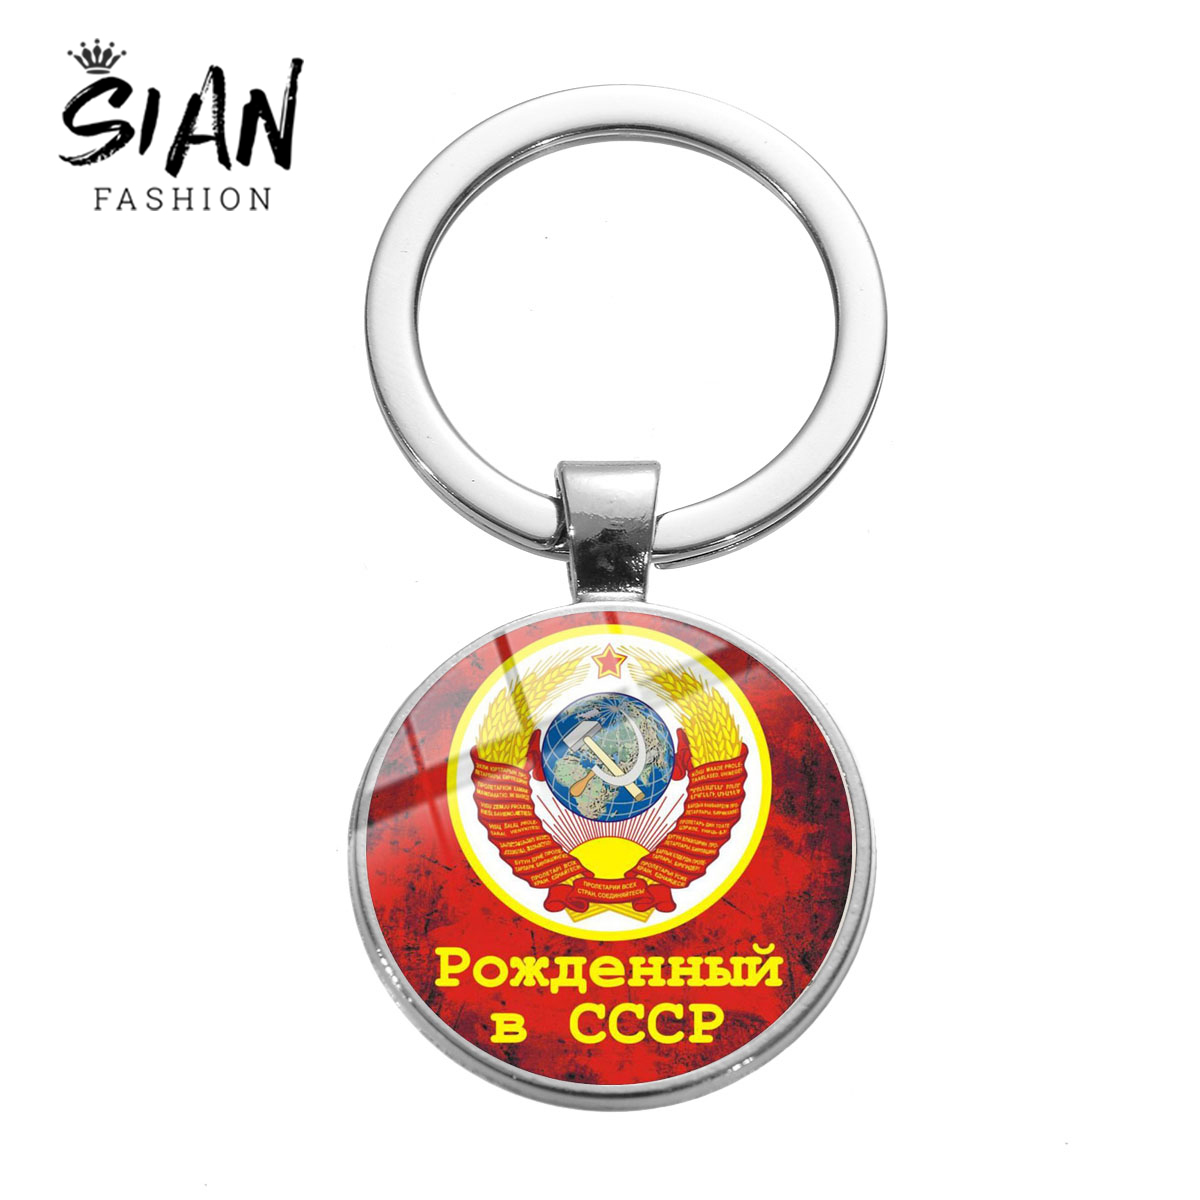 SIAN Classic USSR Soviet Badges Keychain Sickle Hammer CCCP Russia Emblem Communism Printed Glass Round Key Chain Gift Key Ring